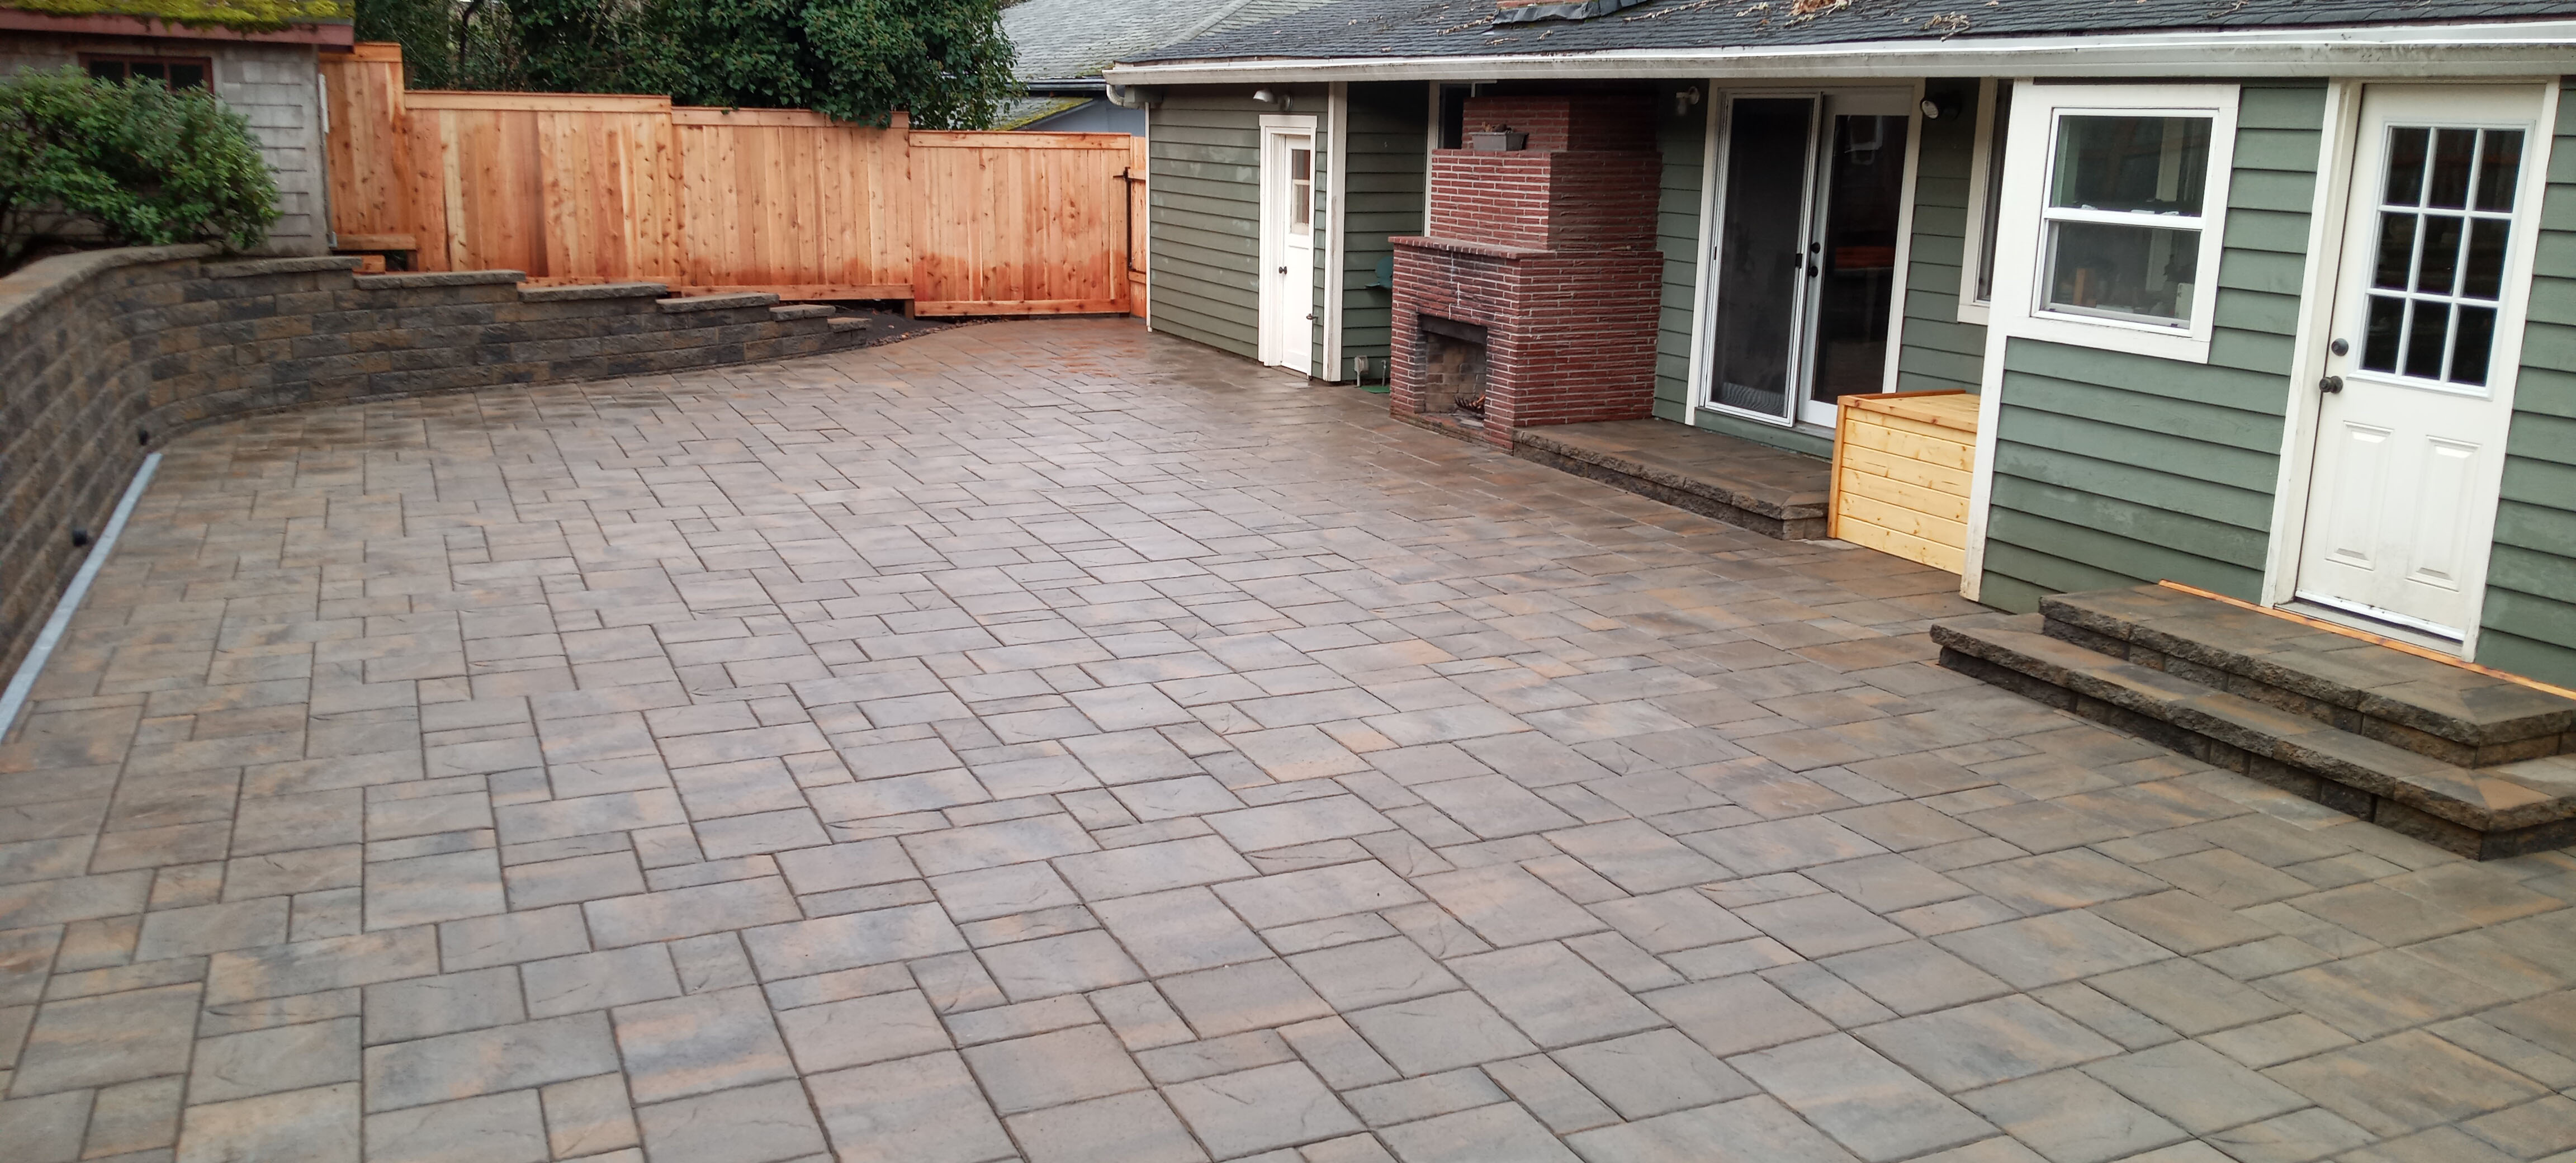 Brand new backyard patio with stone tile flooring and a curved brick retaining wall